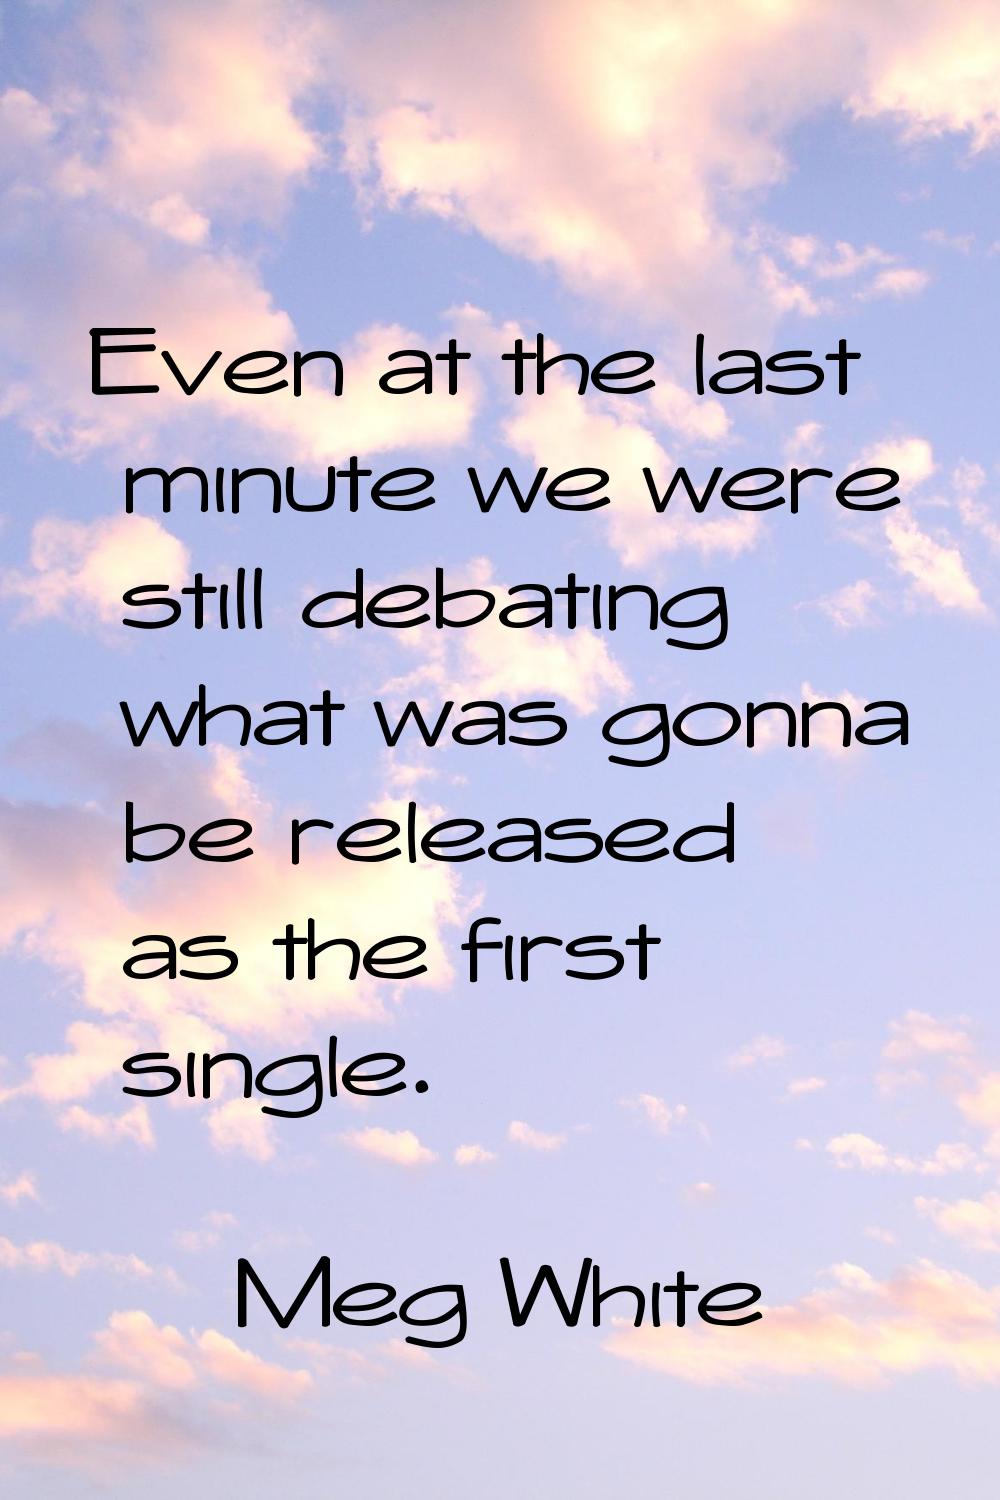 Even at the last minute we were still debating what was gonna be released as the first single.